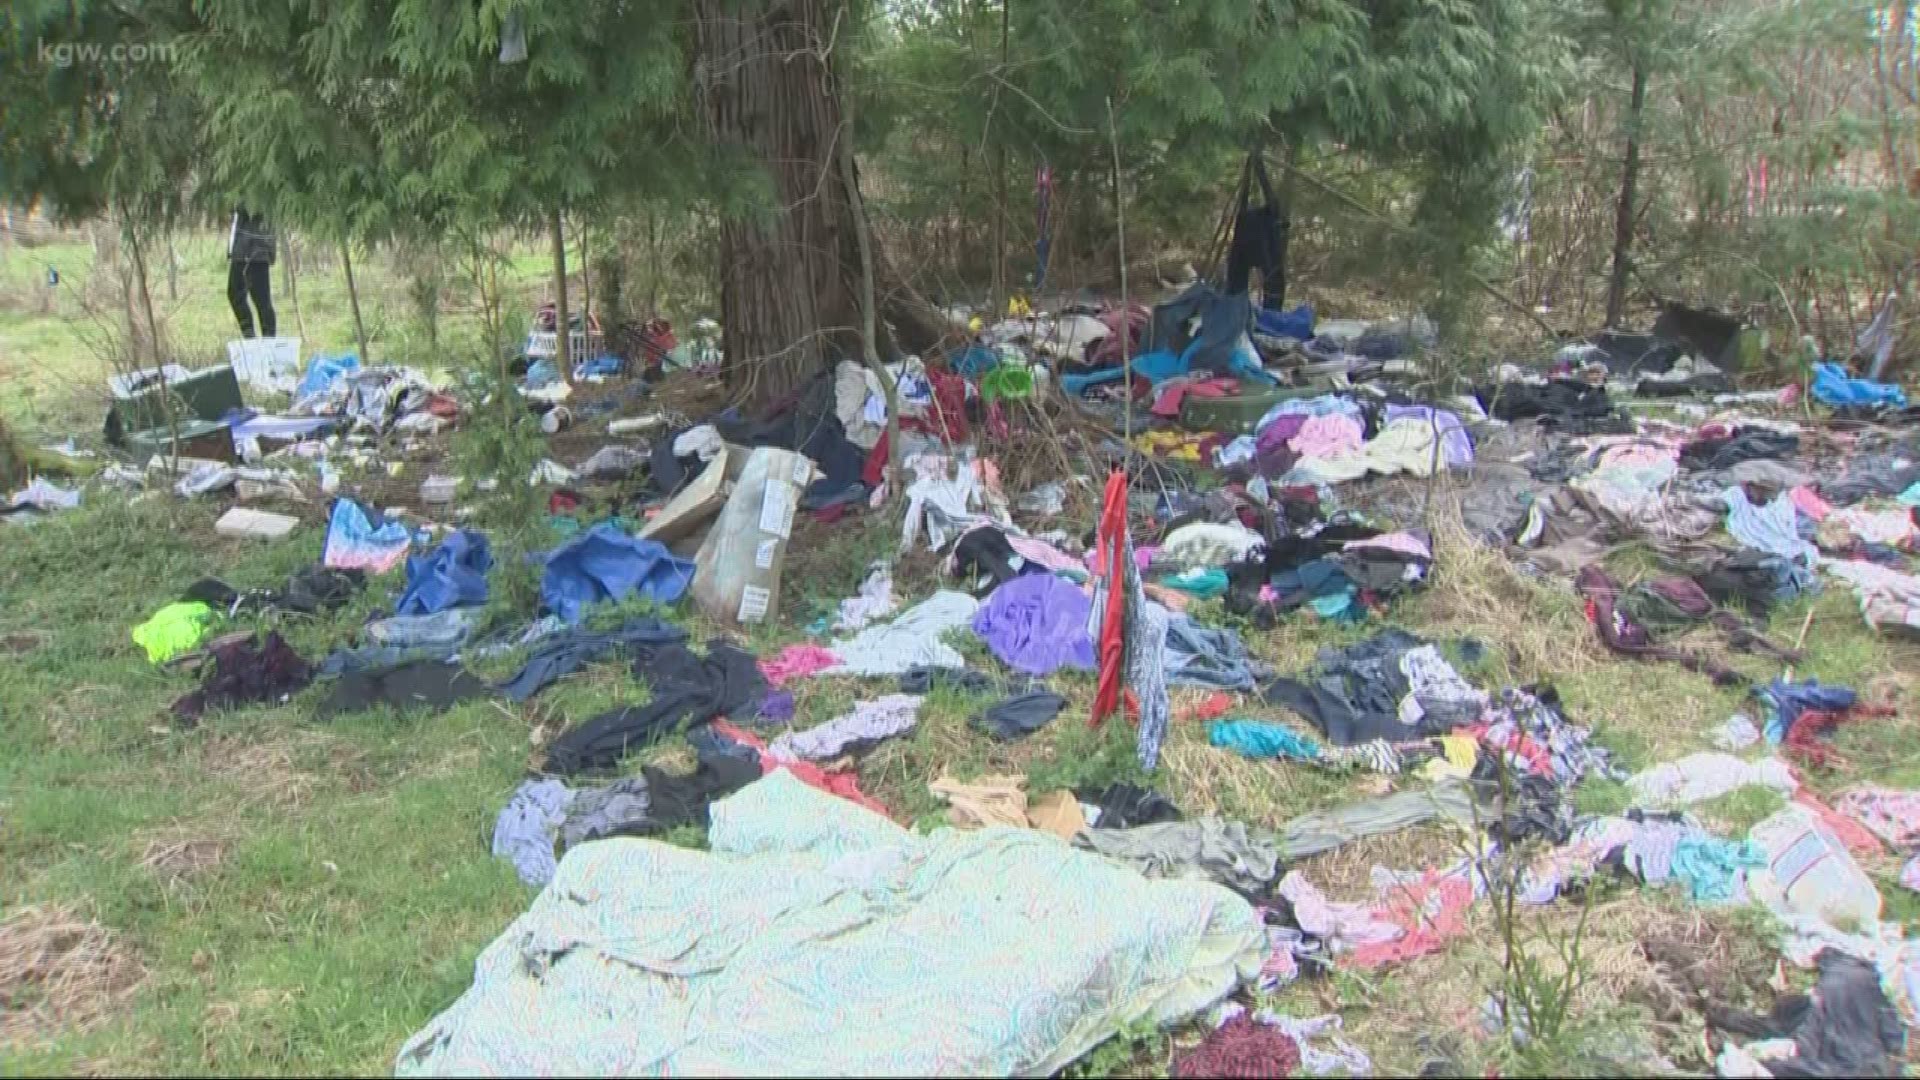 A Gresham homeowner has been ordered to clear homeless camps on his property.